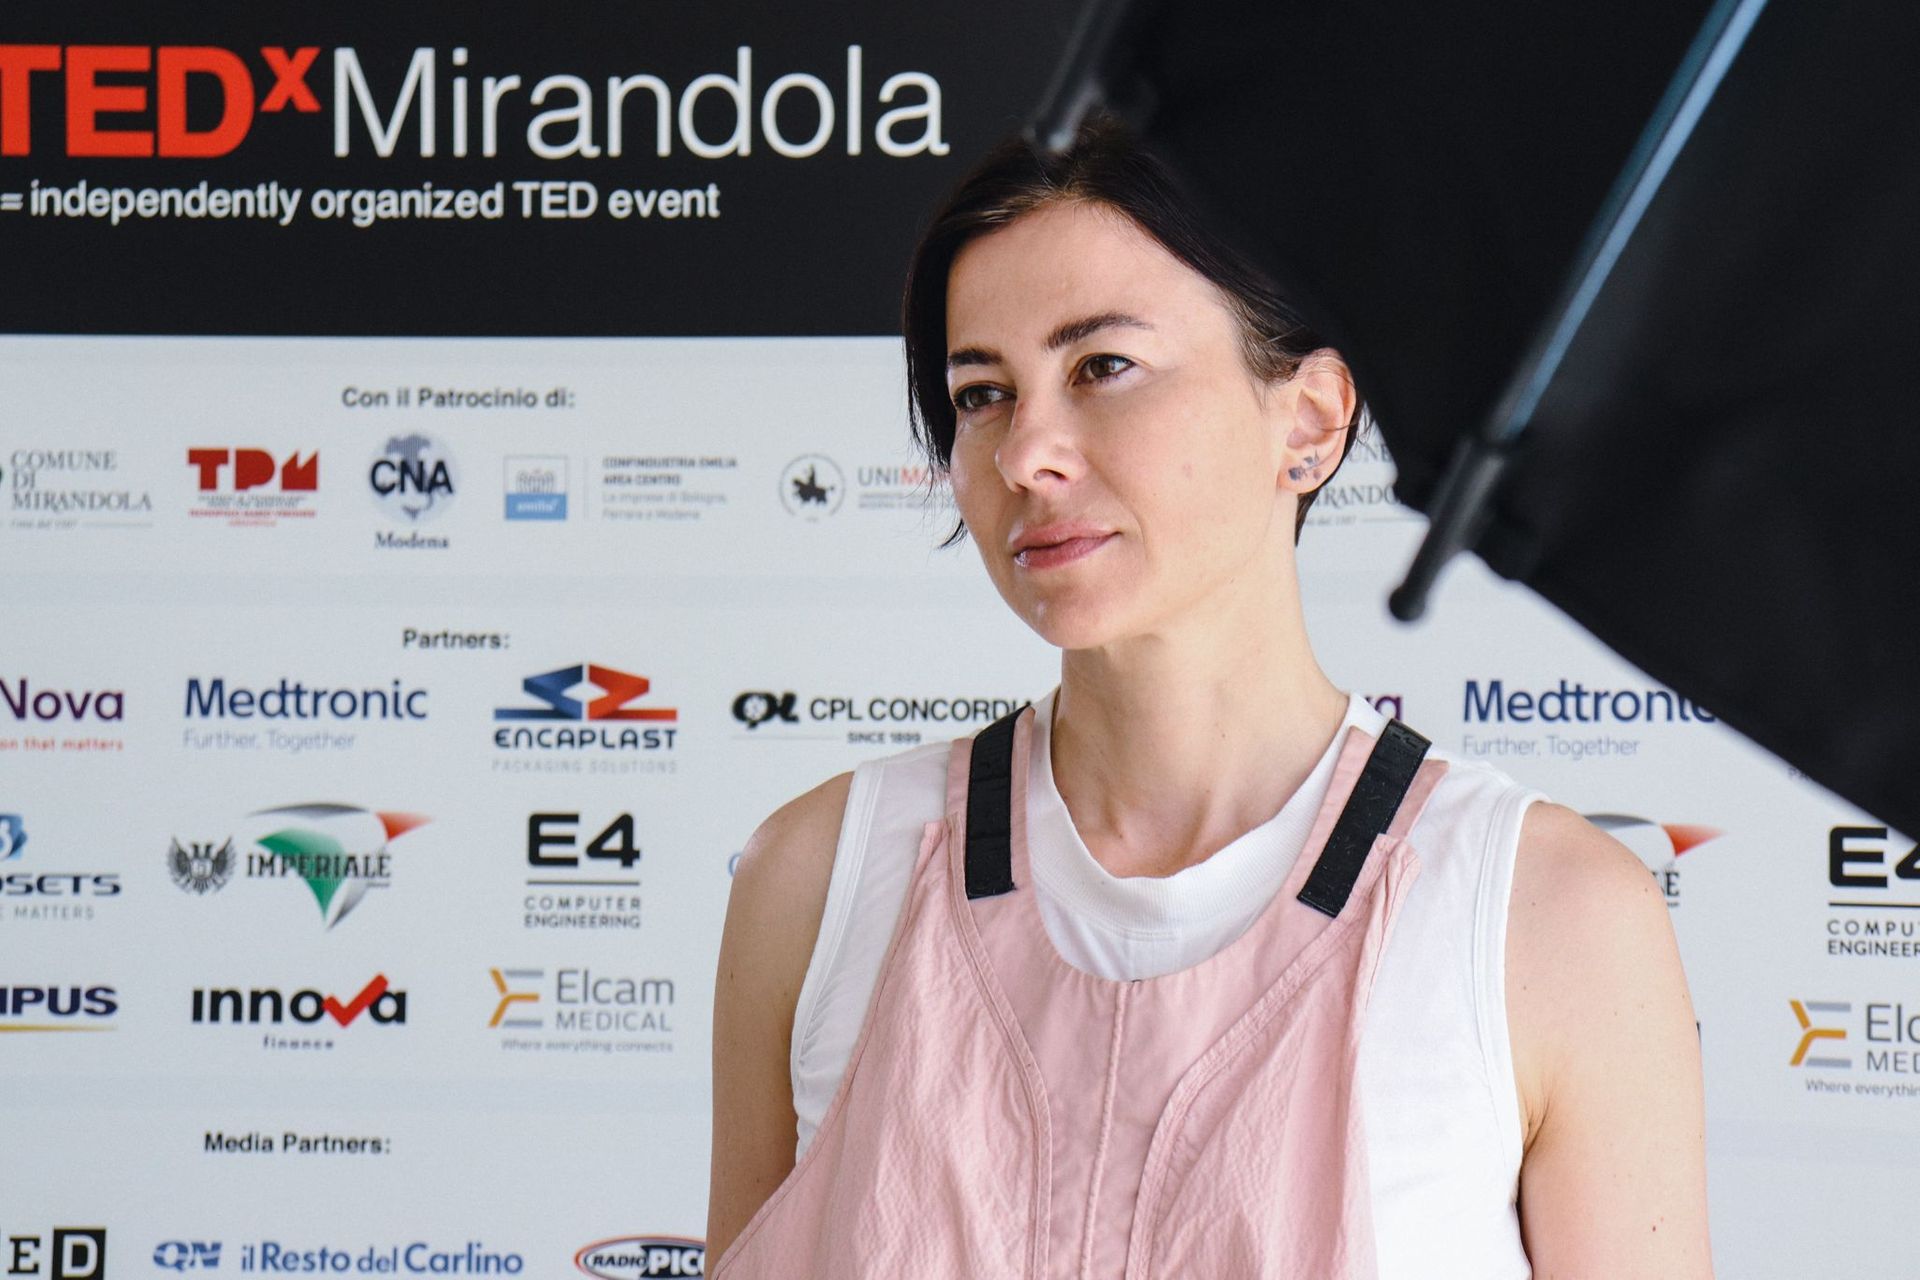 Founder of the Maverx Foundation, Francesca Veronesi is the daughter of Mario, pioneer of the biomedical district in 1962: she was a speaker at the first edition of TEDx Mirandola